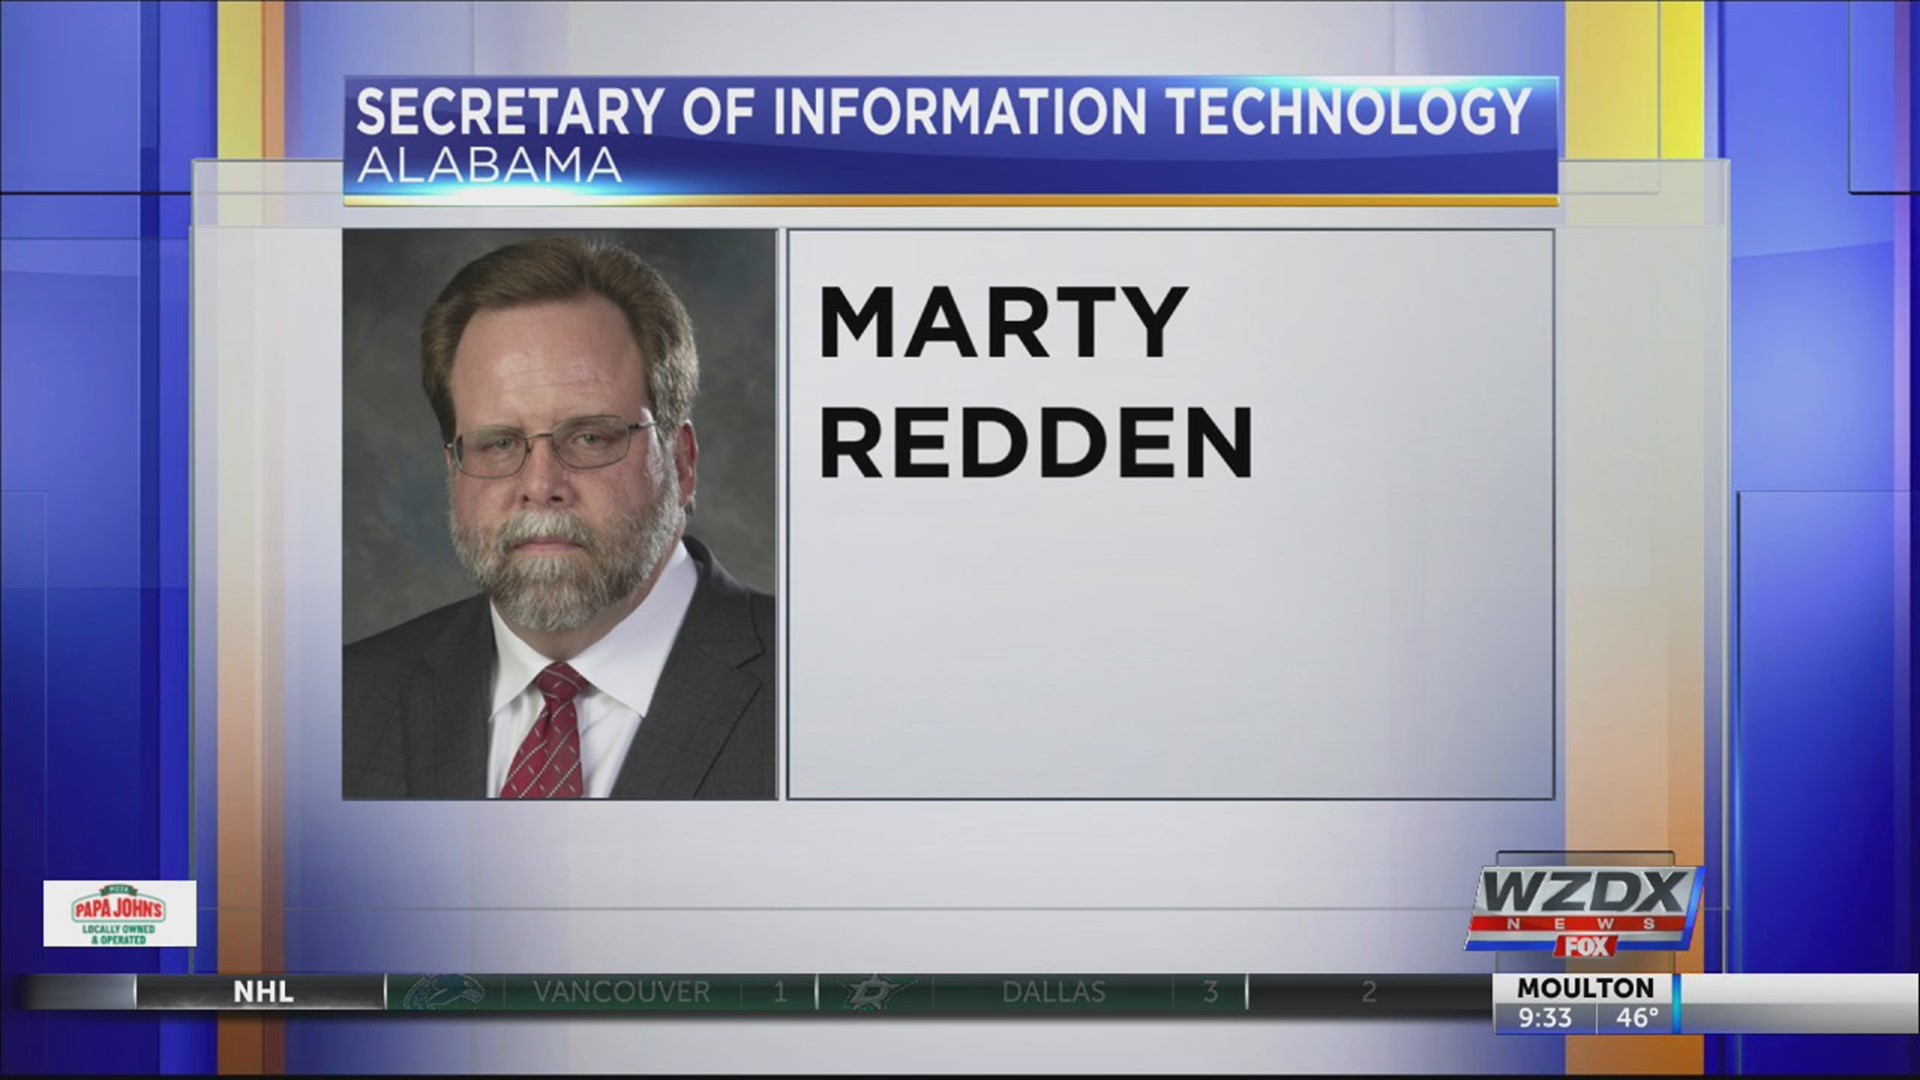 Gov. Ivey announced Tuesday that Marty Redden will serve as the Alabama Office of Information Technology Secretary. Redden began serving as the acting secretary in July 2019.